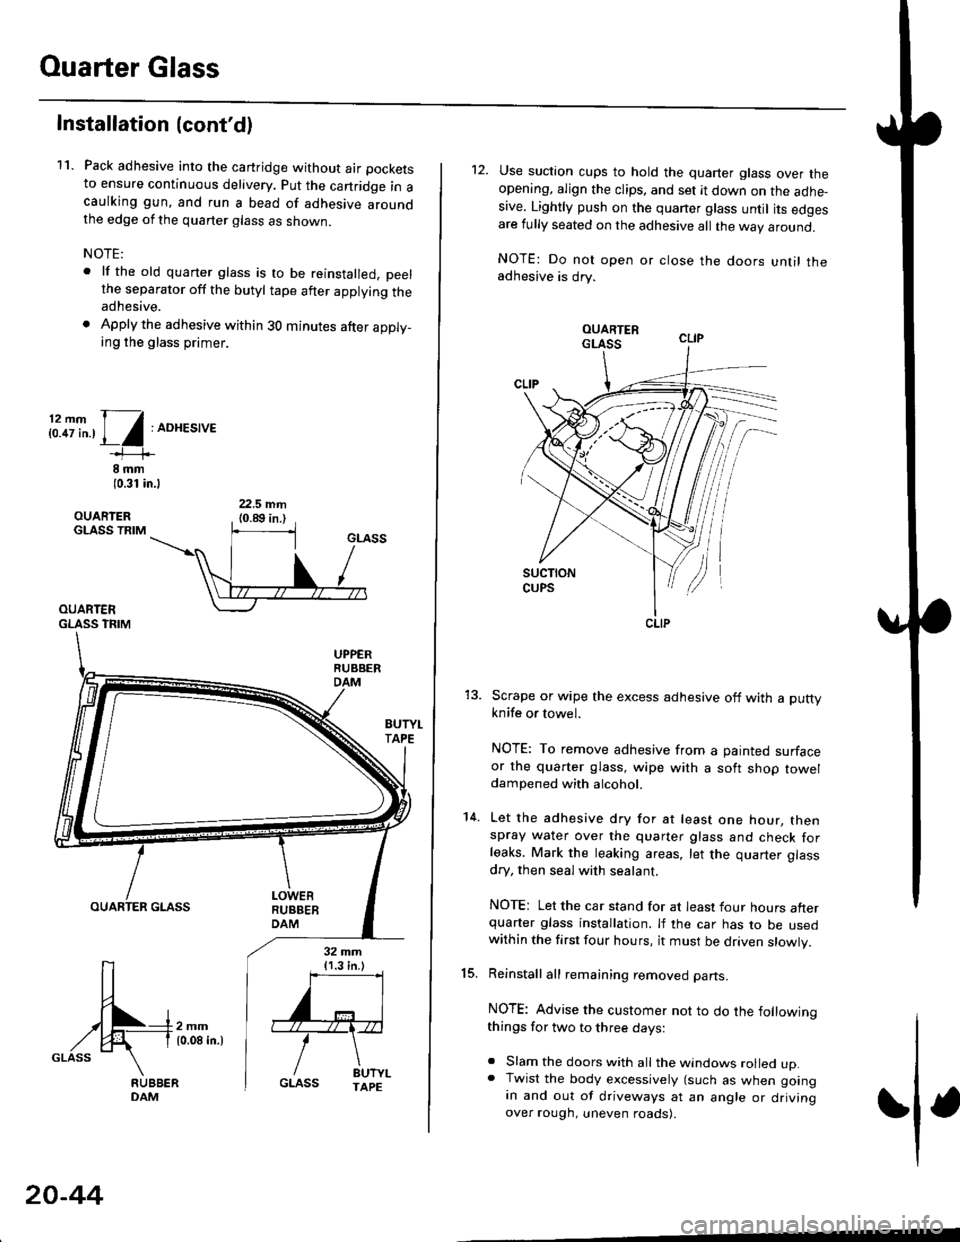 HONDA CIVIC 1996 6.G Workshop Manual Ouarter Glass
Installation (contd)
11. Pack adhesive into the cartridge without air pockets
to ensure continuous delivery. put the canridge in acaulking gun, and run a bead of adhesive aroundthe edge